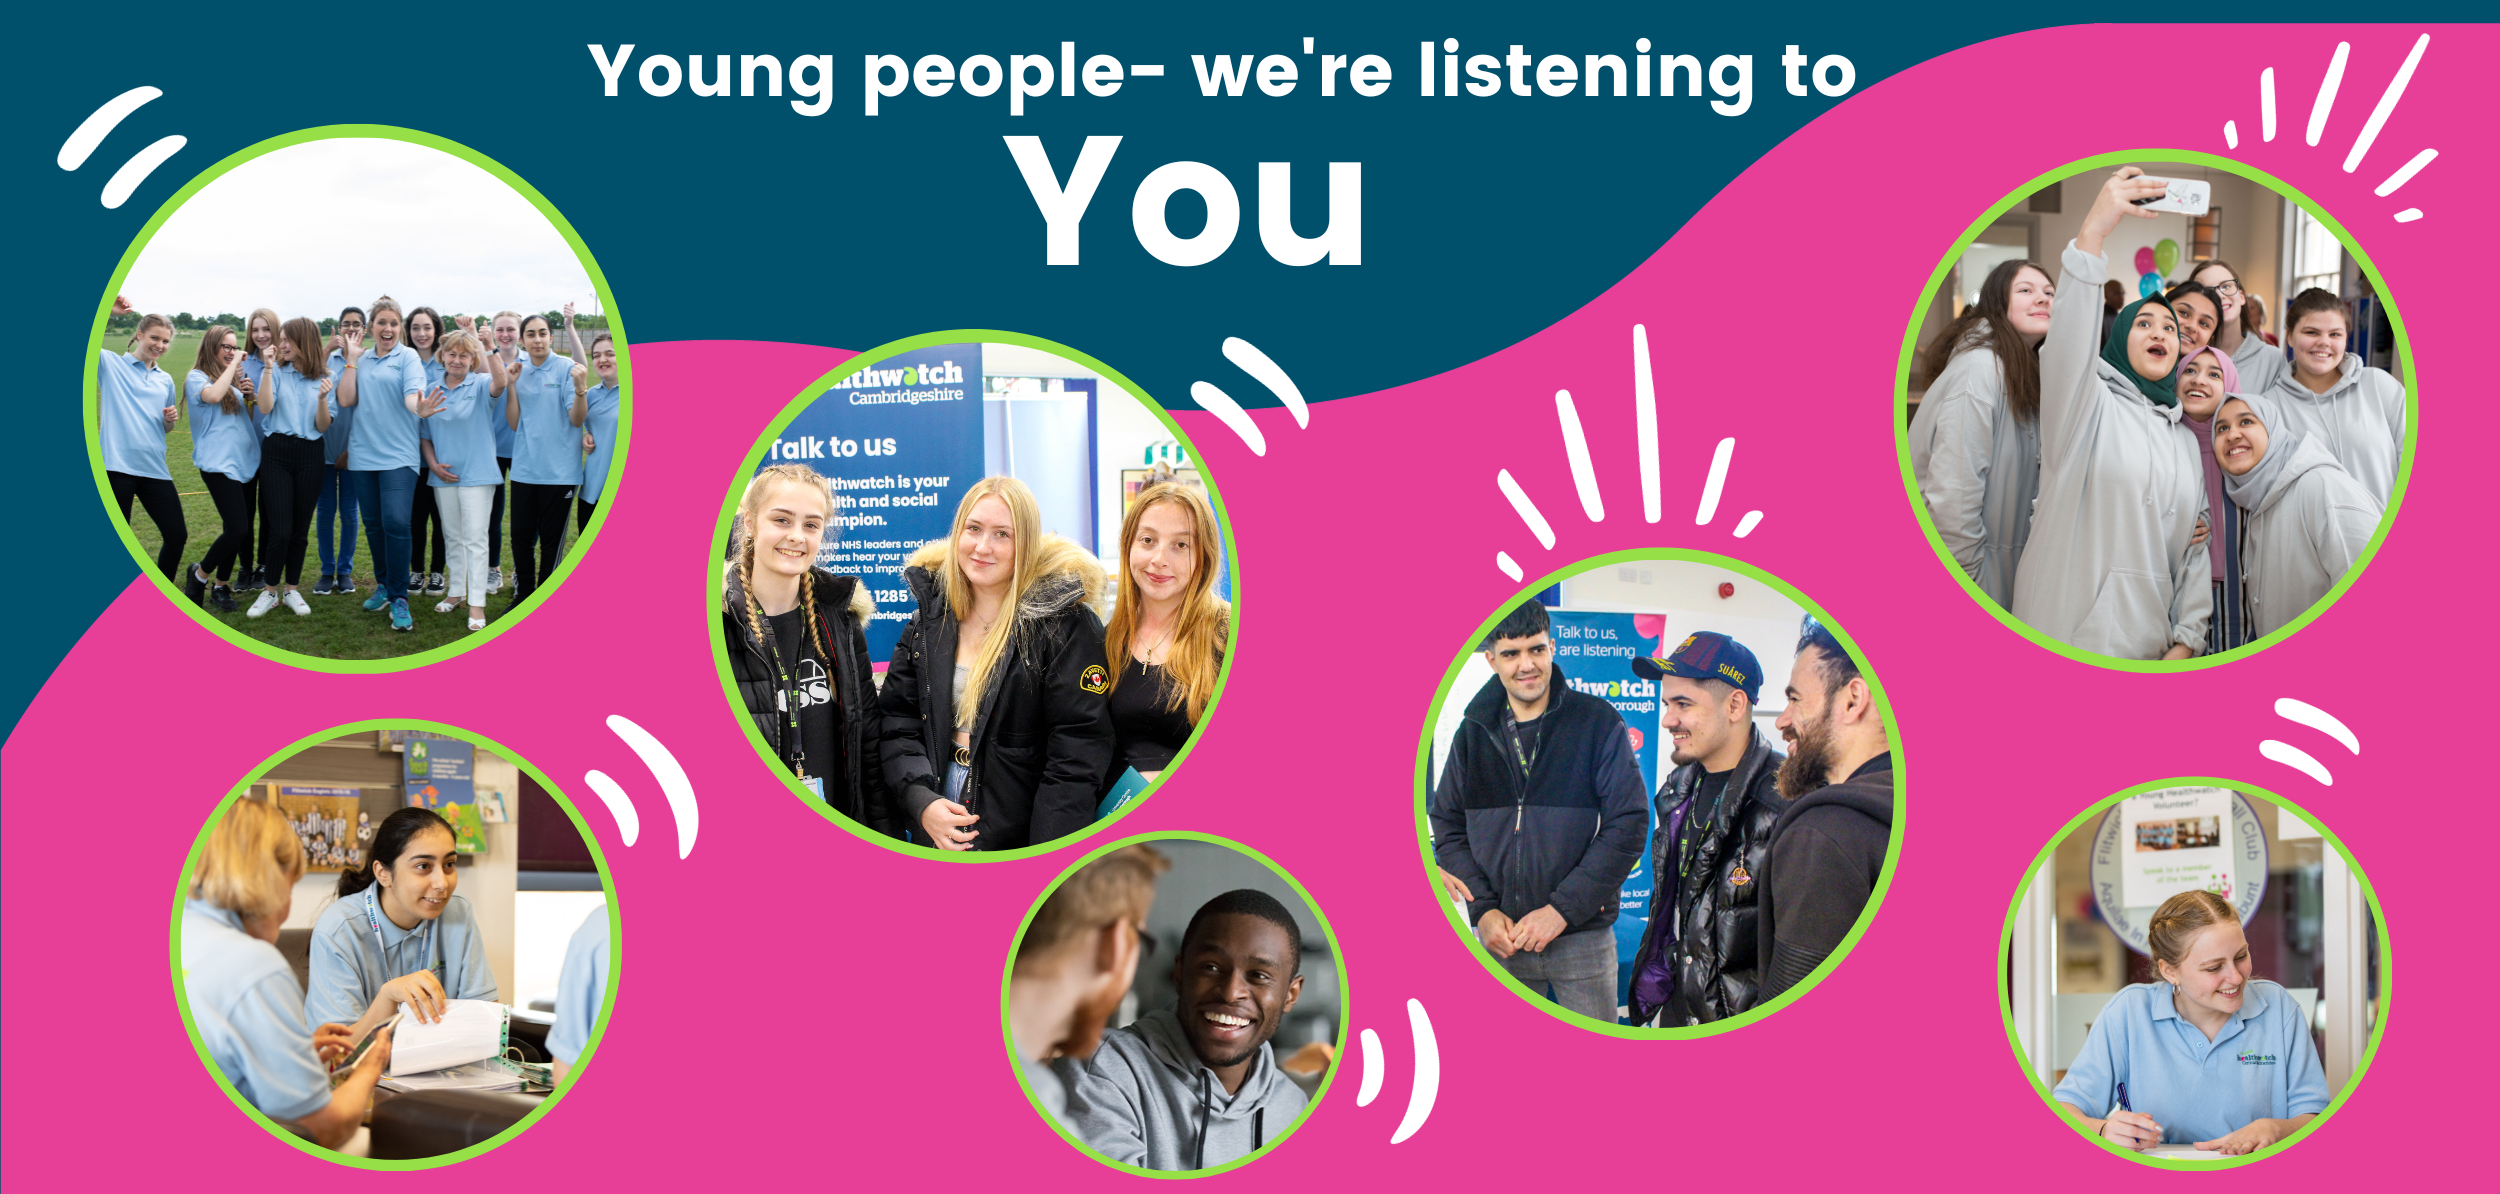 Pictures of youthwatch members. Text reads Young people- we're listening to you